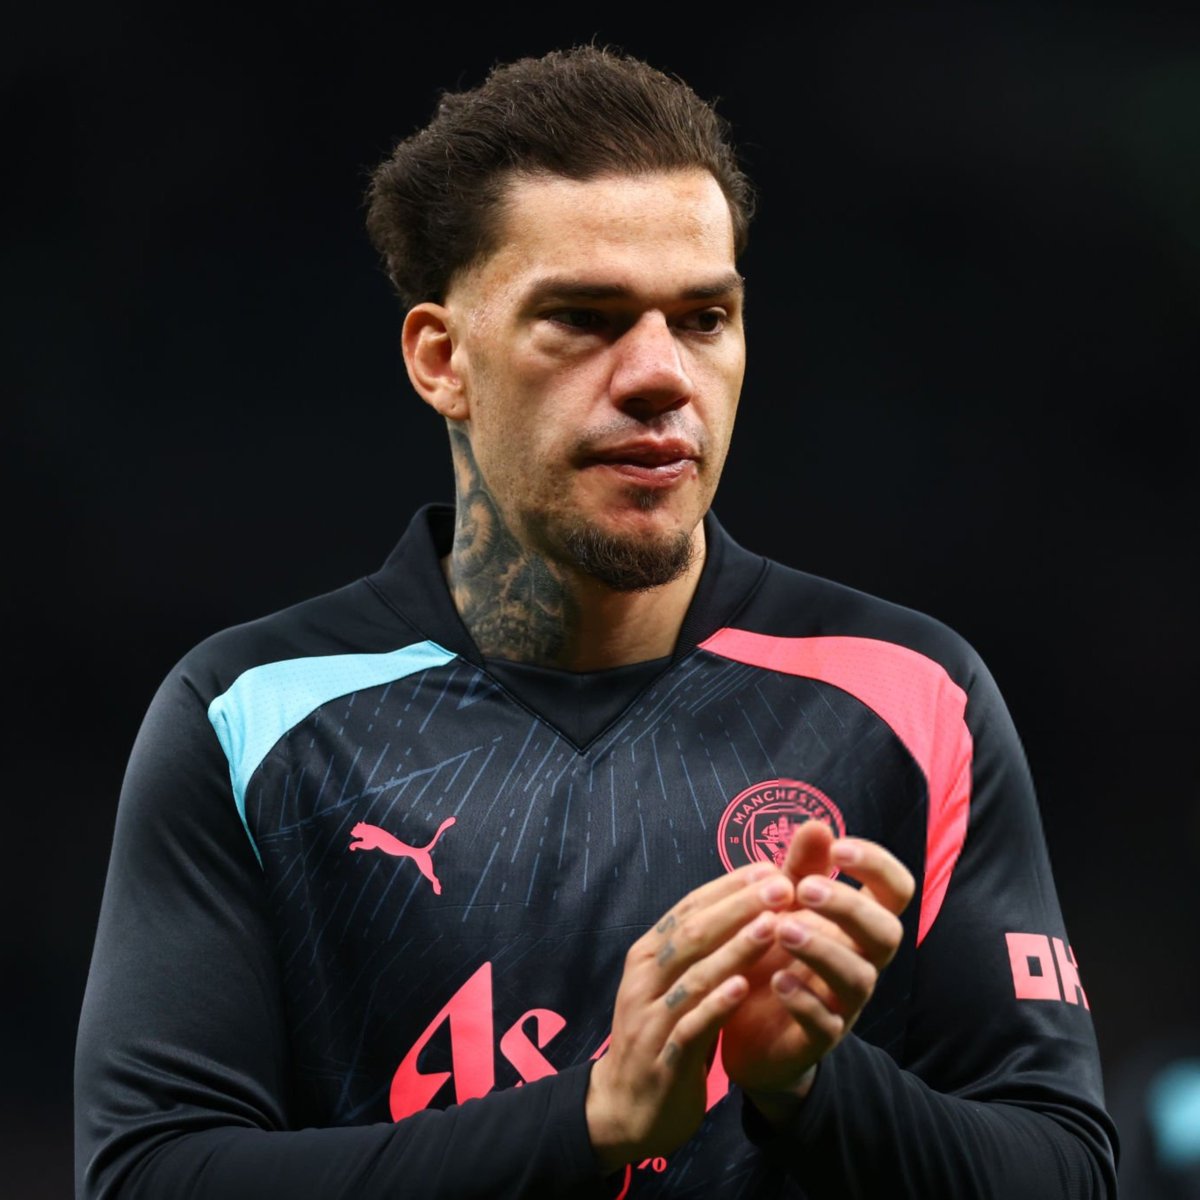 🚨 𝗕𝗥𝗘𝗔𝗞𝗜𝗡𝗚: Ederson is OUT of the rest of the season with a fractured eye socket! 🤕❌